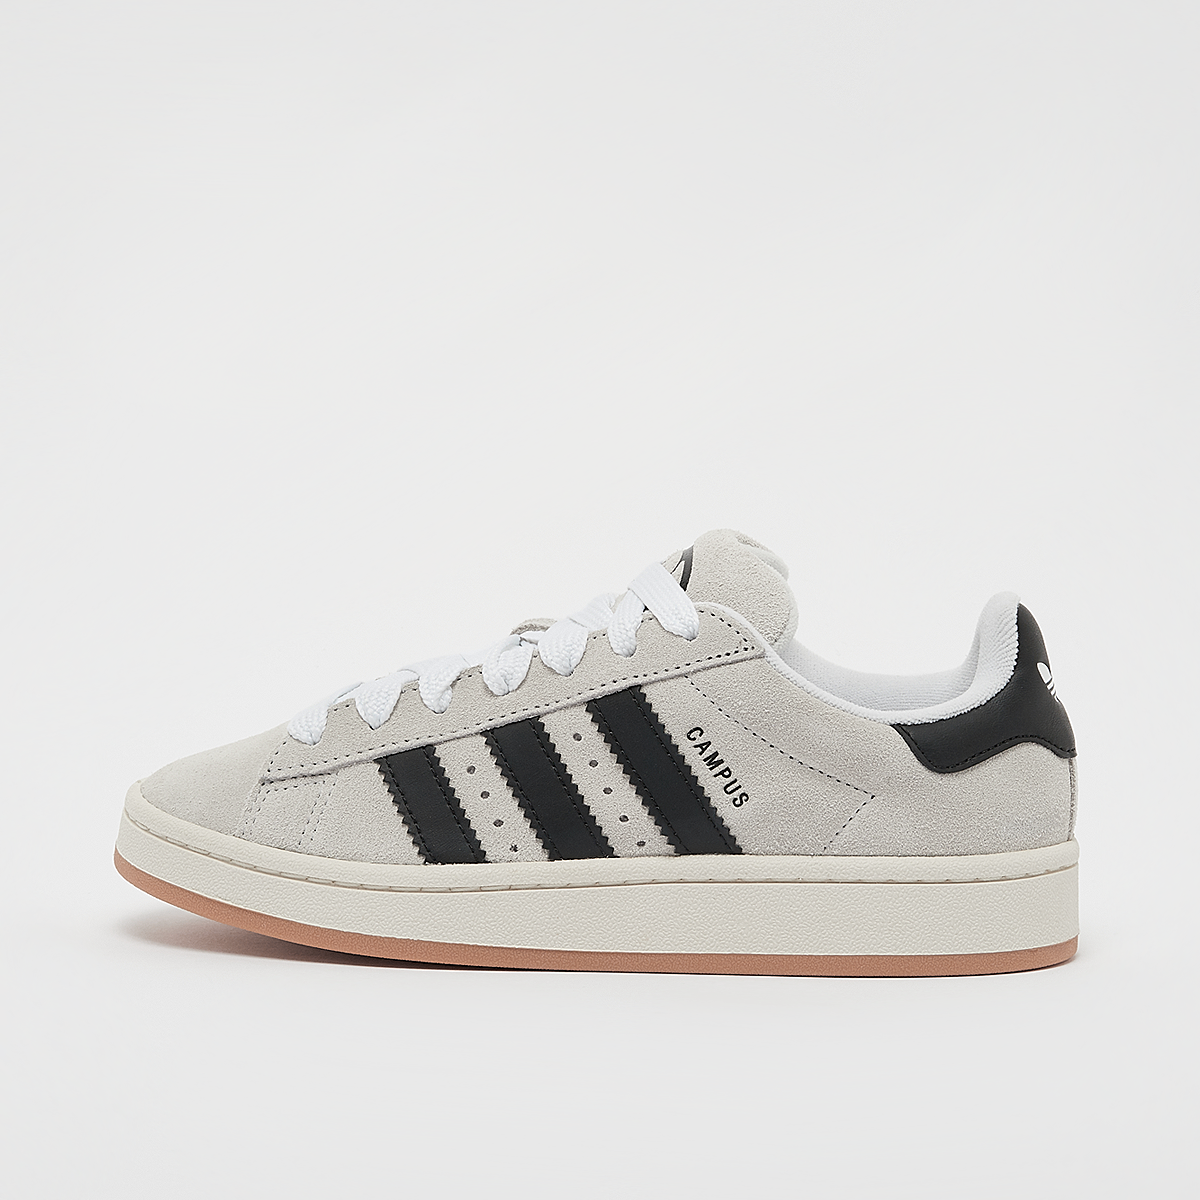 Sneaker Campus 00s W, adidas Originals, Footwear, crystal white/core black/off white, taille: 36 2/3